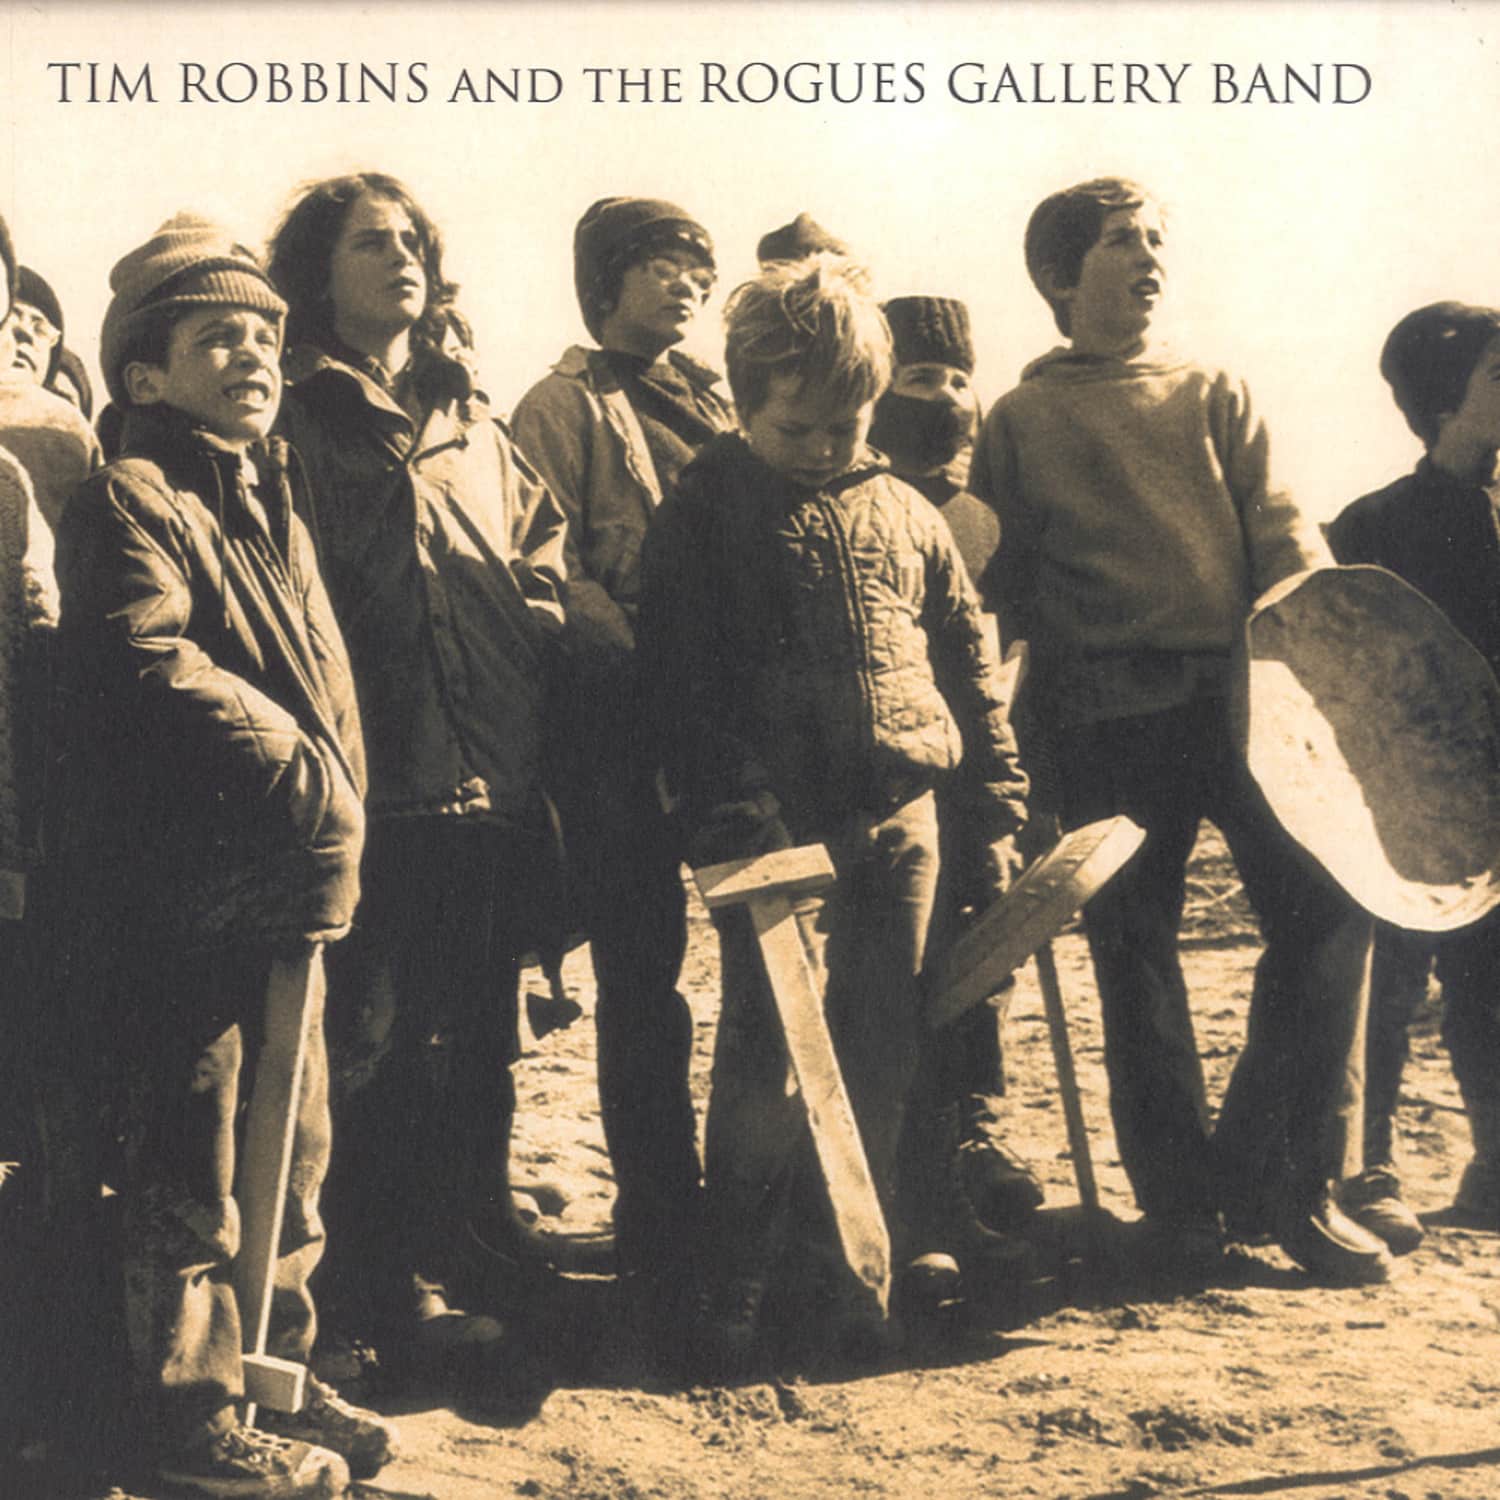 Tim Robbins And The Rogues Gallery Band - TIM ROBBINS AND THE ROGUES GALLERY BAND 